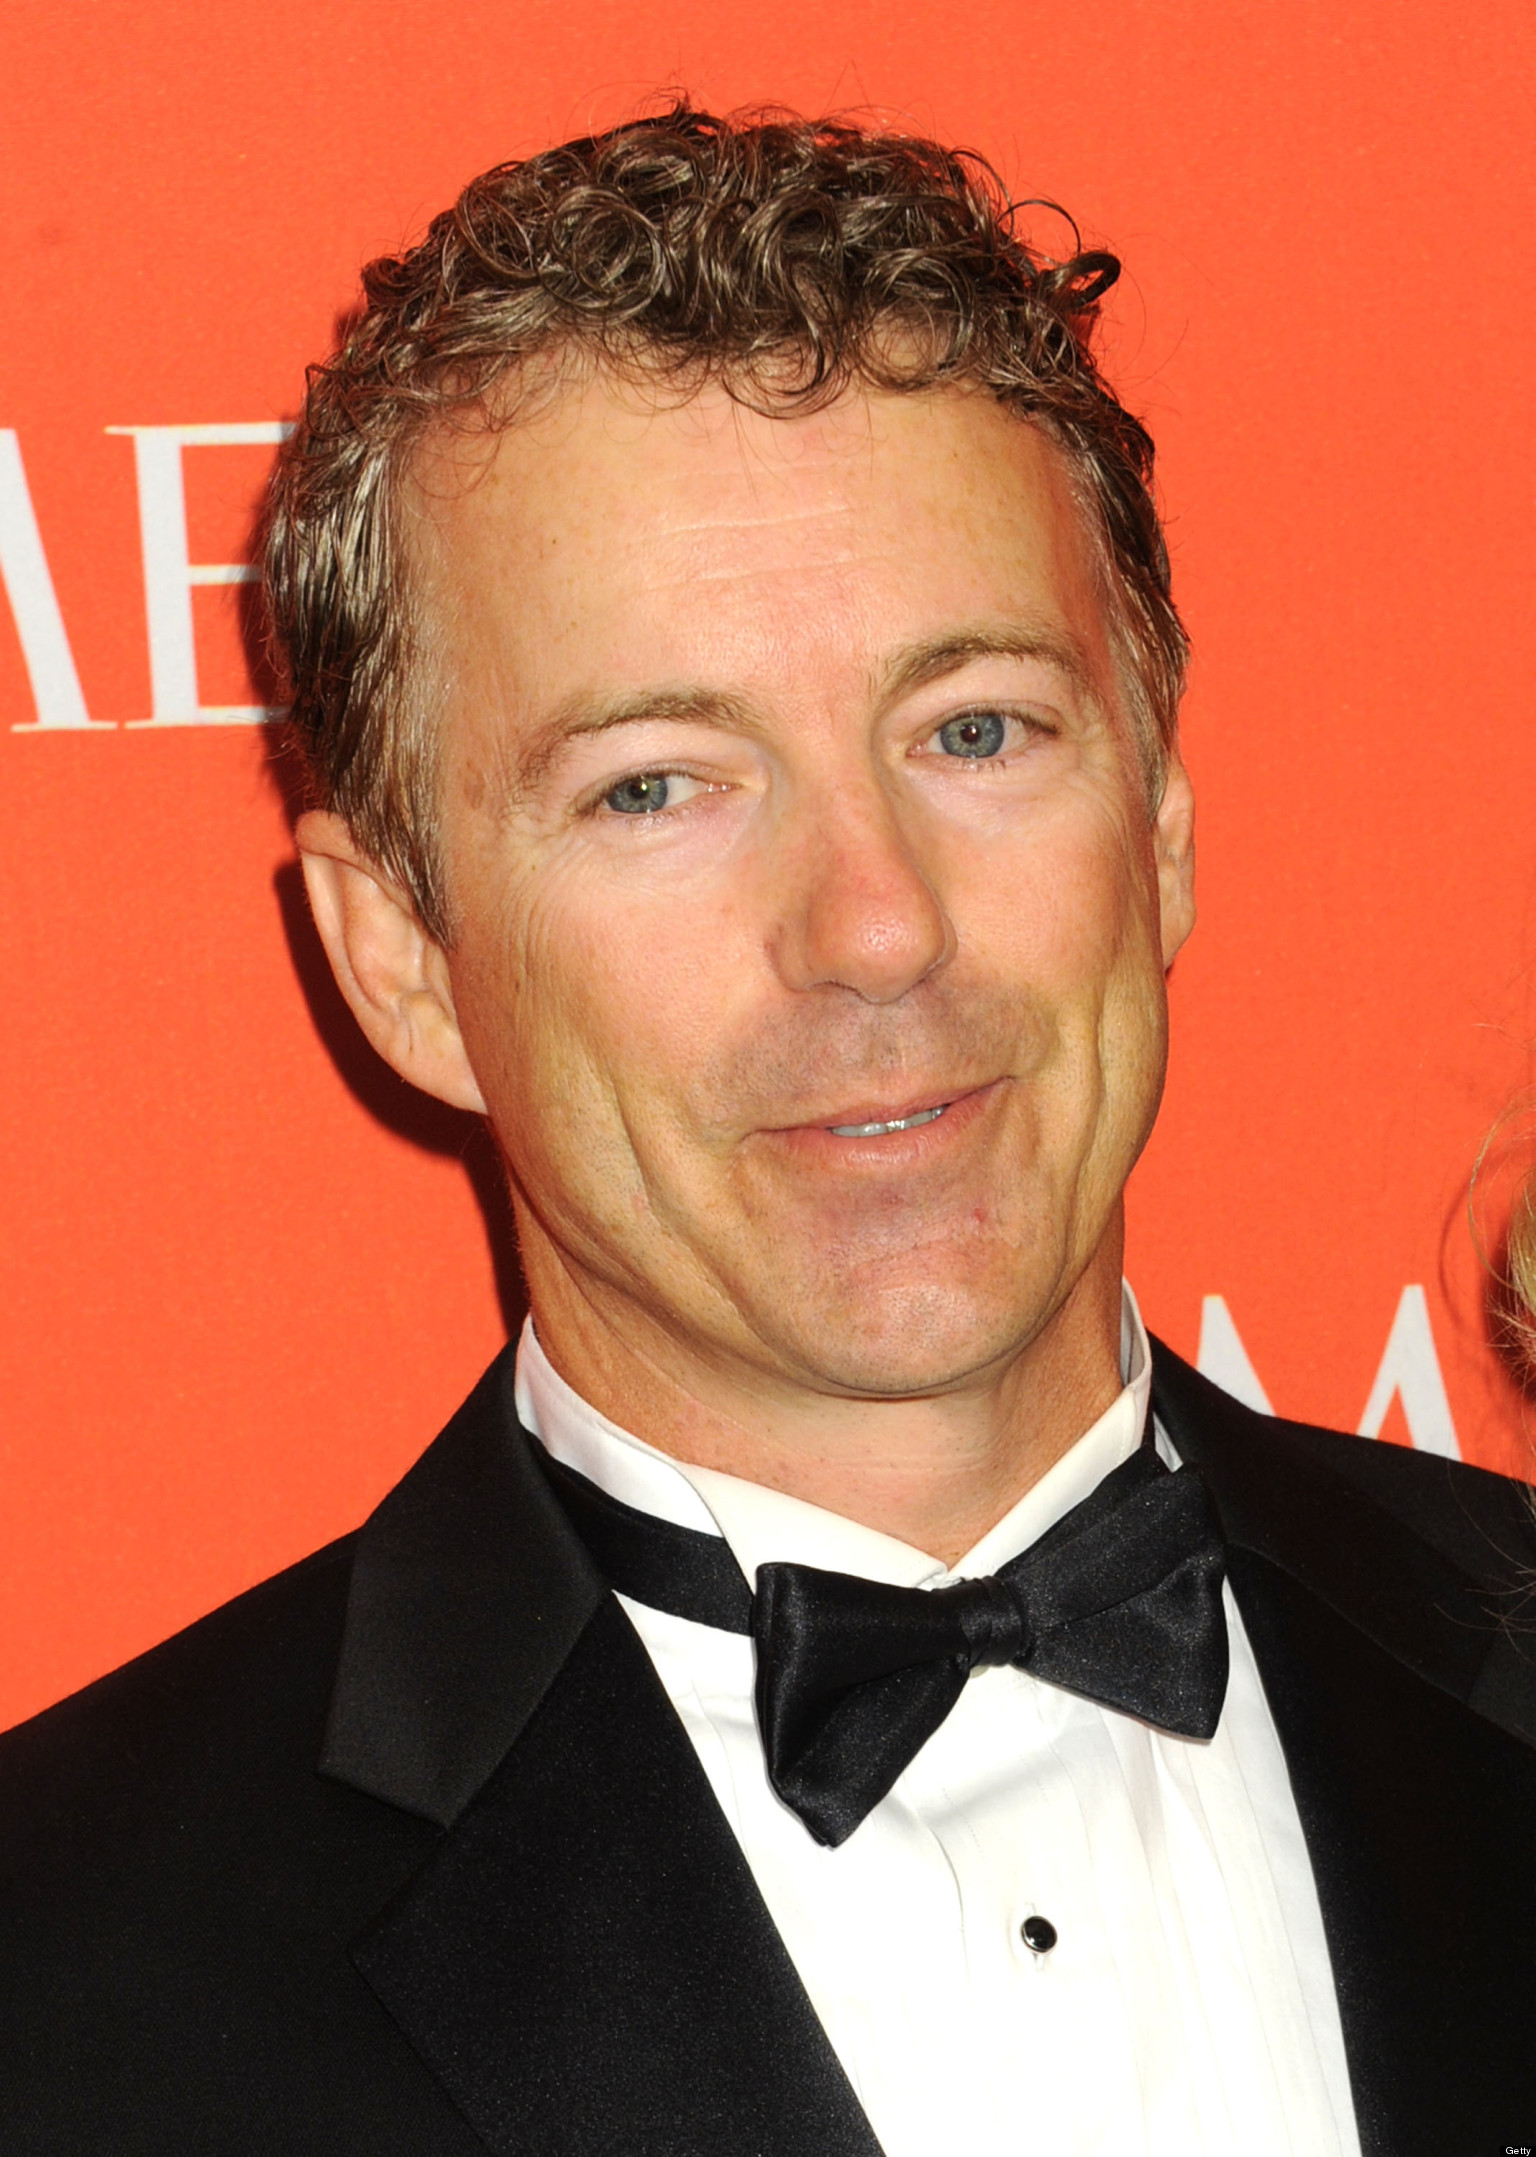 This Is The Rand Paul Moment | HuffPost